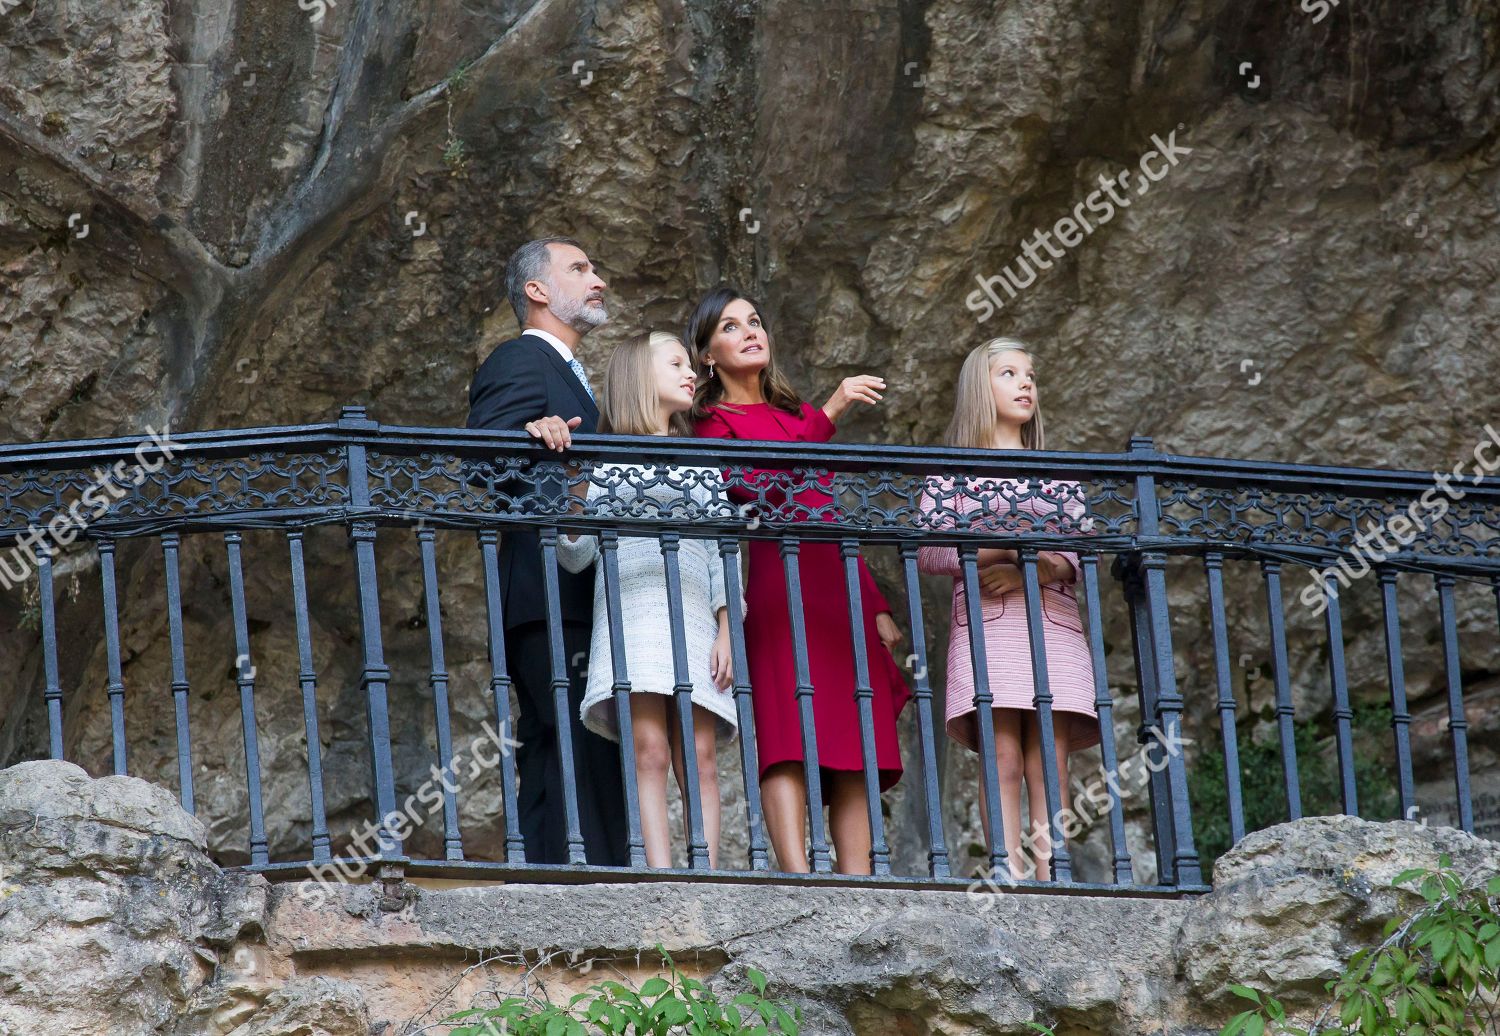 first-official-visit-of-princess-leonor-to-asturias-spain-shutterstock-editorial-9877305m.jpg